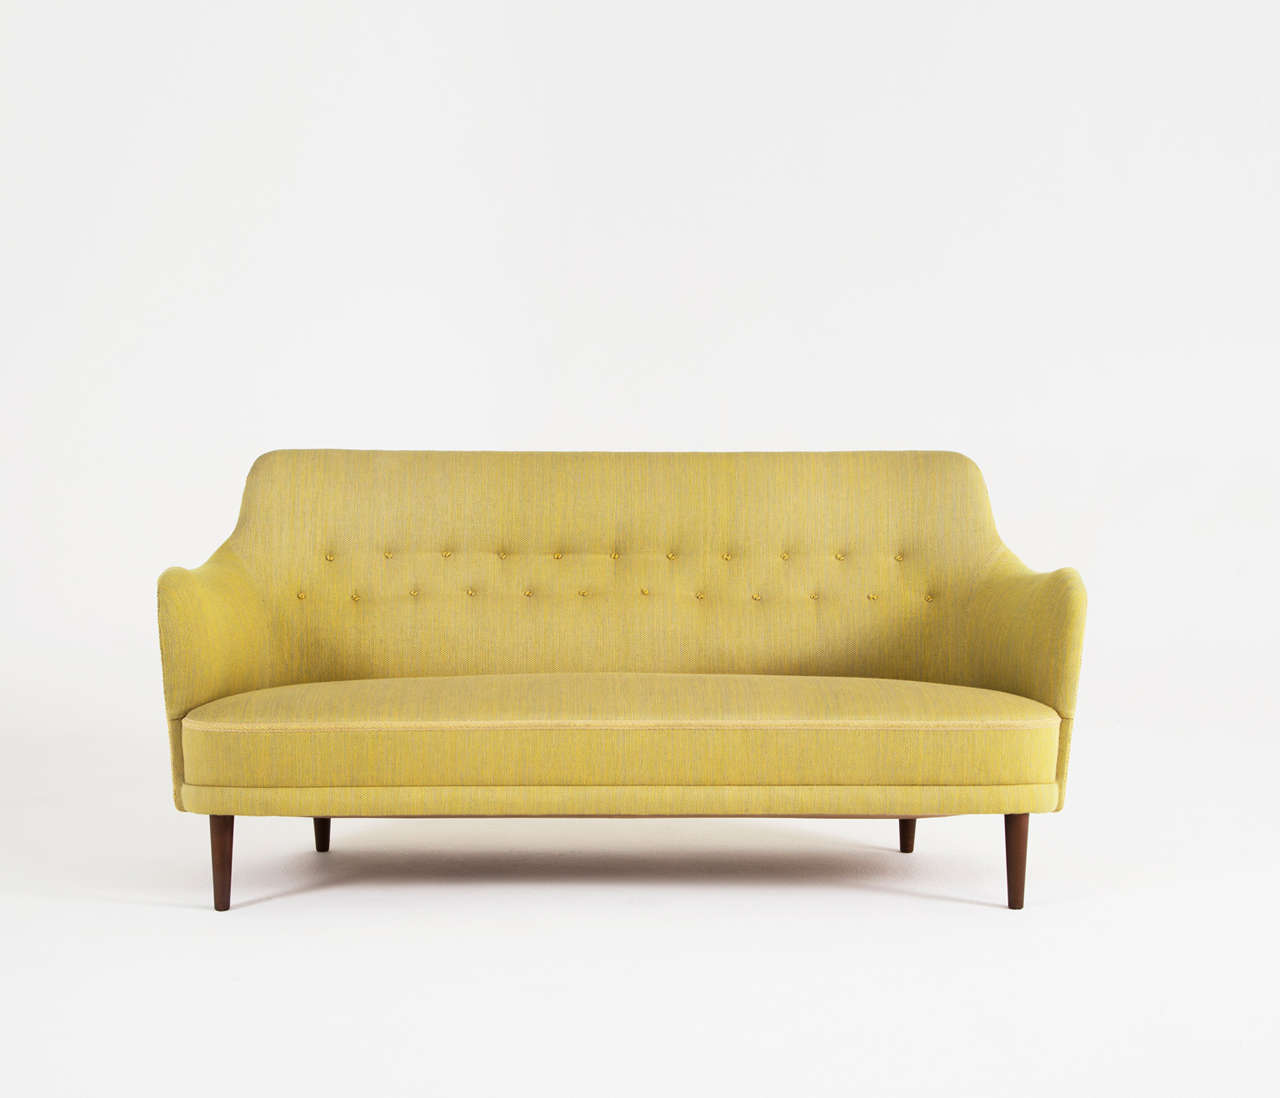 Elegant Three seater sofa by Carl Malmsten, produced by O.H Sjögren in Sweden,1960. The original design of this sofa dates back to 1923.

Malmsten was well know for his devotion to true Swedish craftsmanship.

The sofa shows interesting and